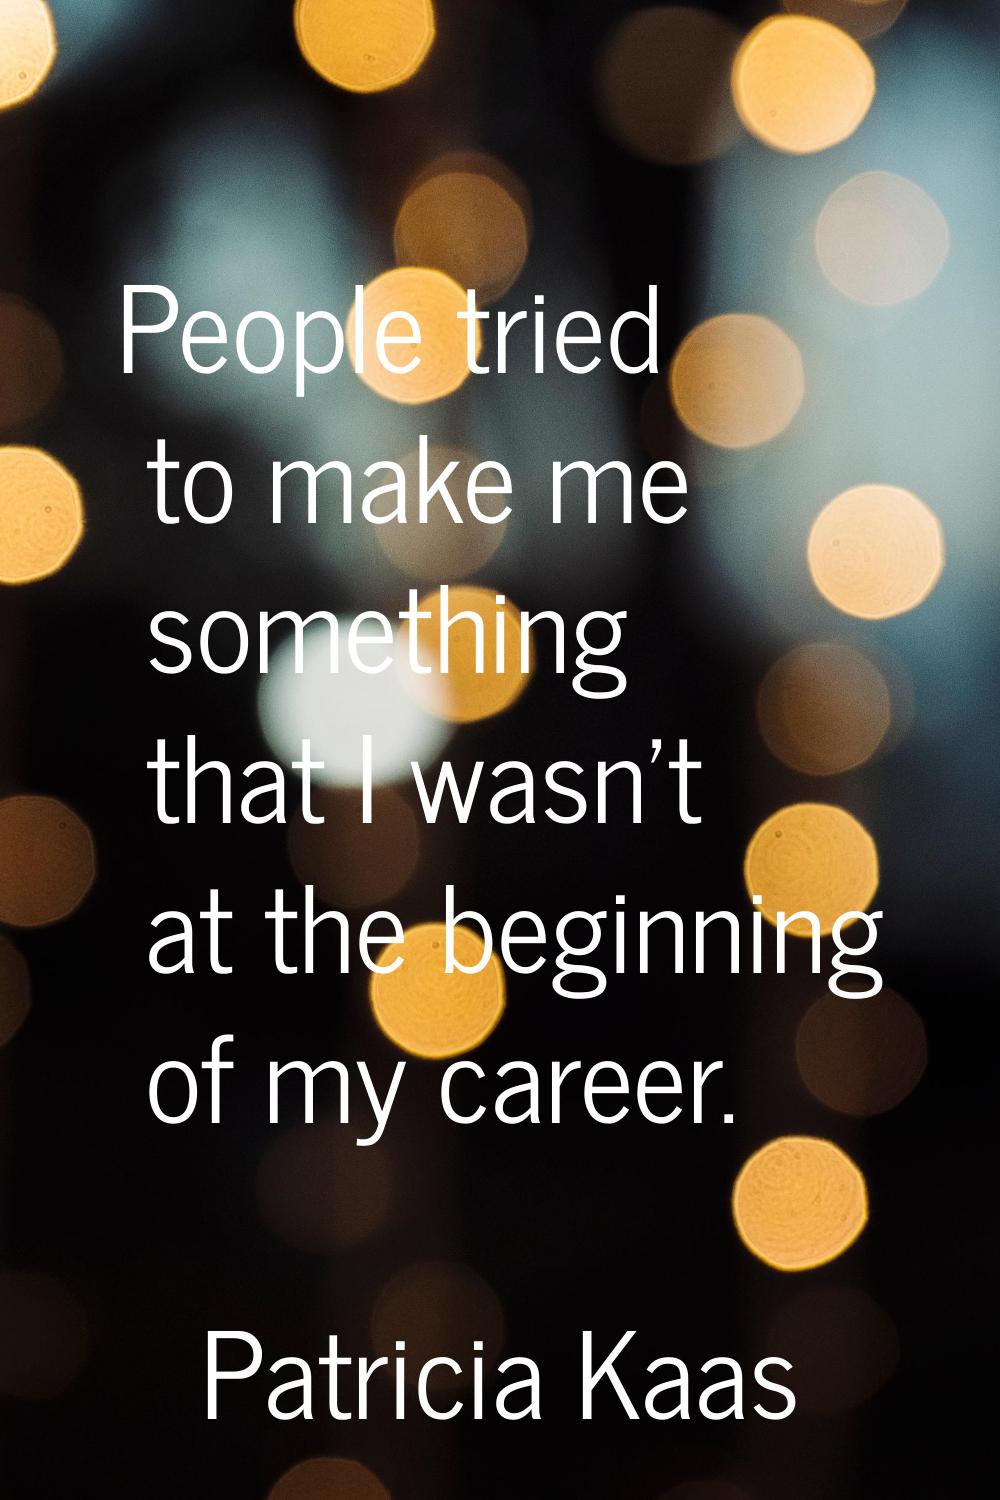 People tried to make me something that I wasn't at the beginning of my career.